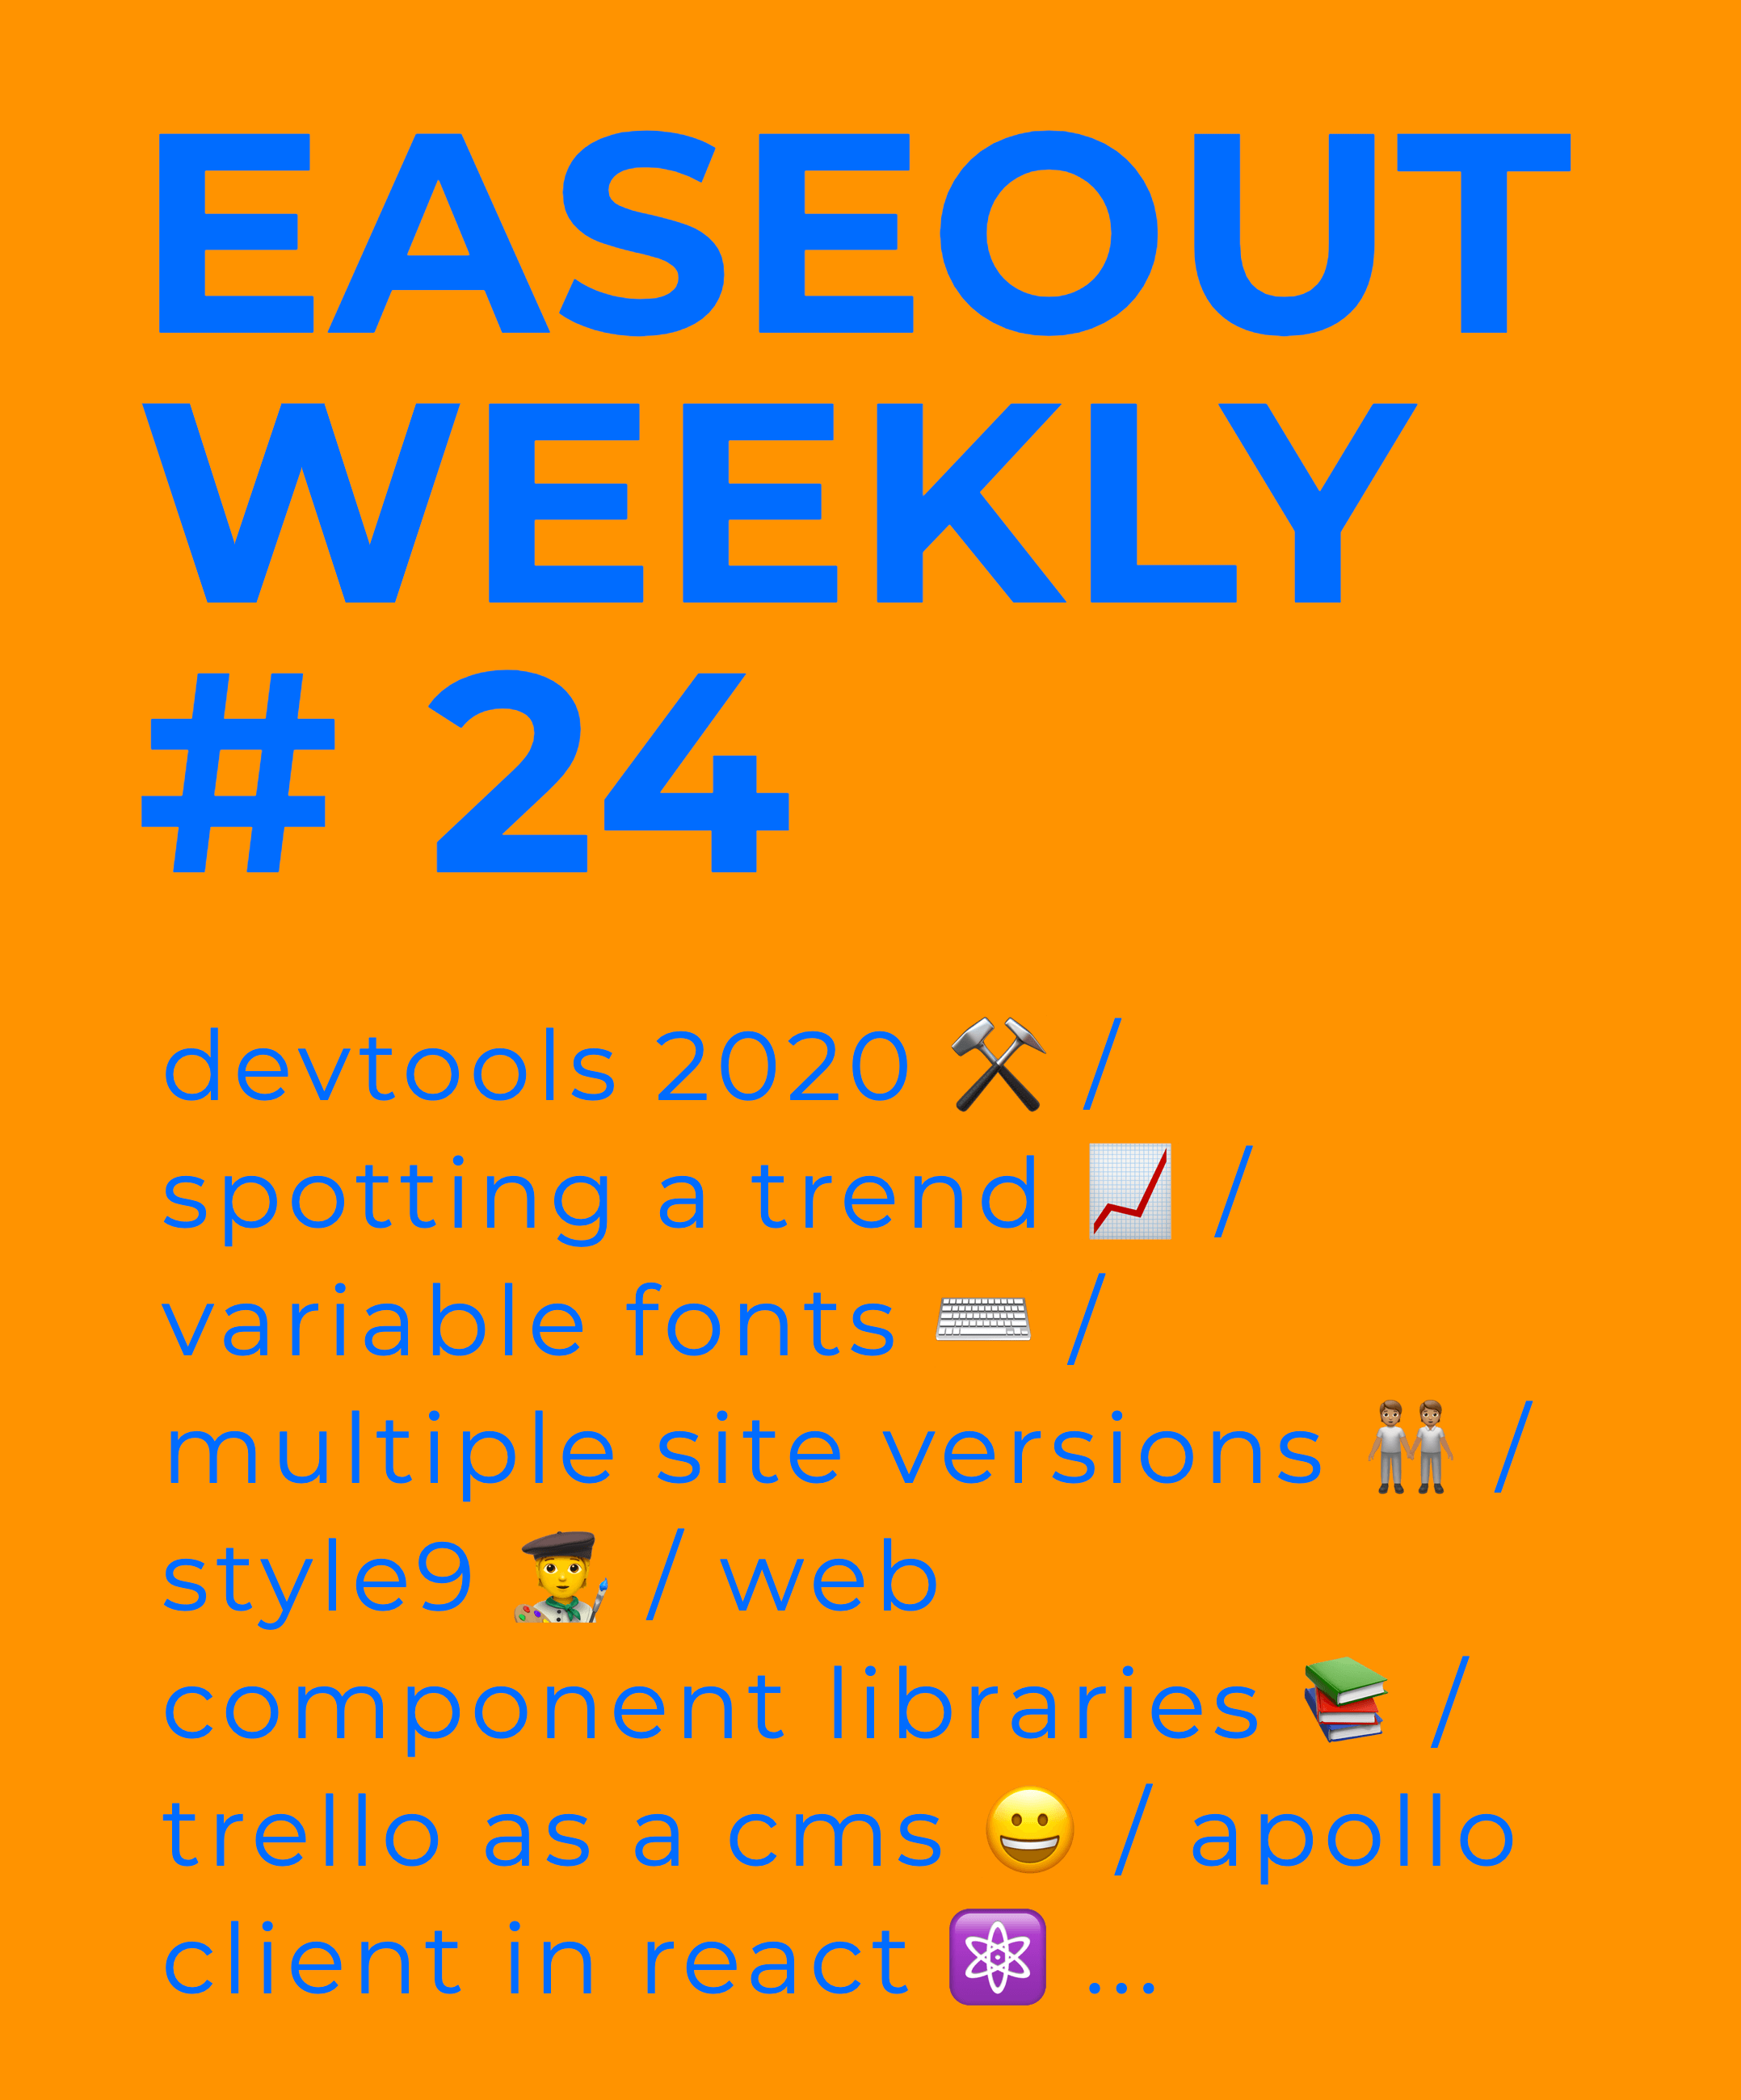 Easeout Weekly #24